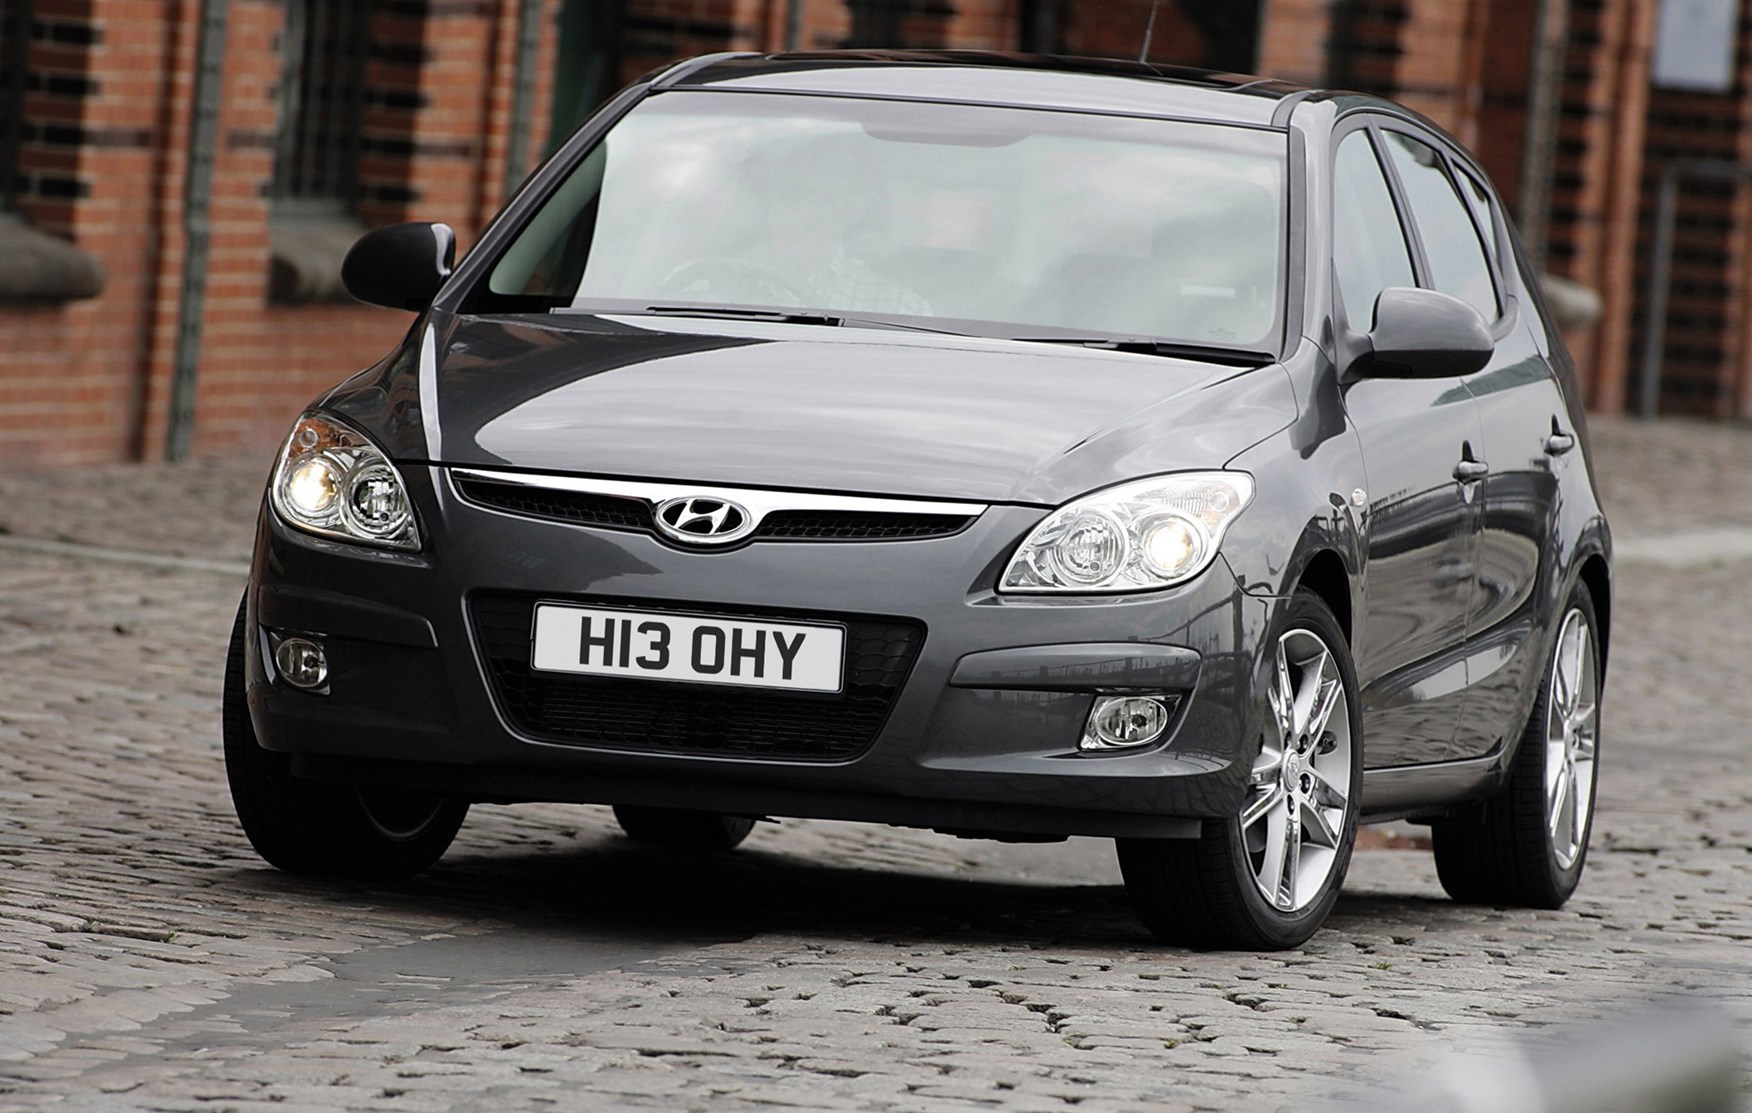 Used Hyundai i30 Hatchback (2007 2011) Review Parkers